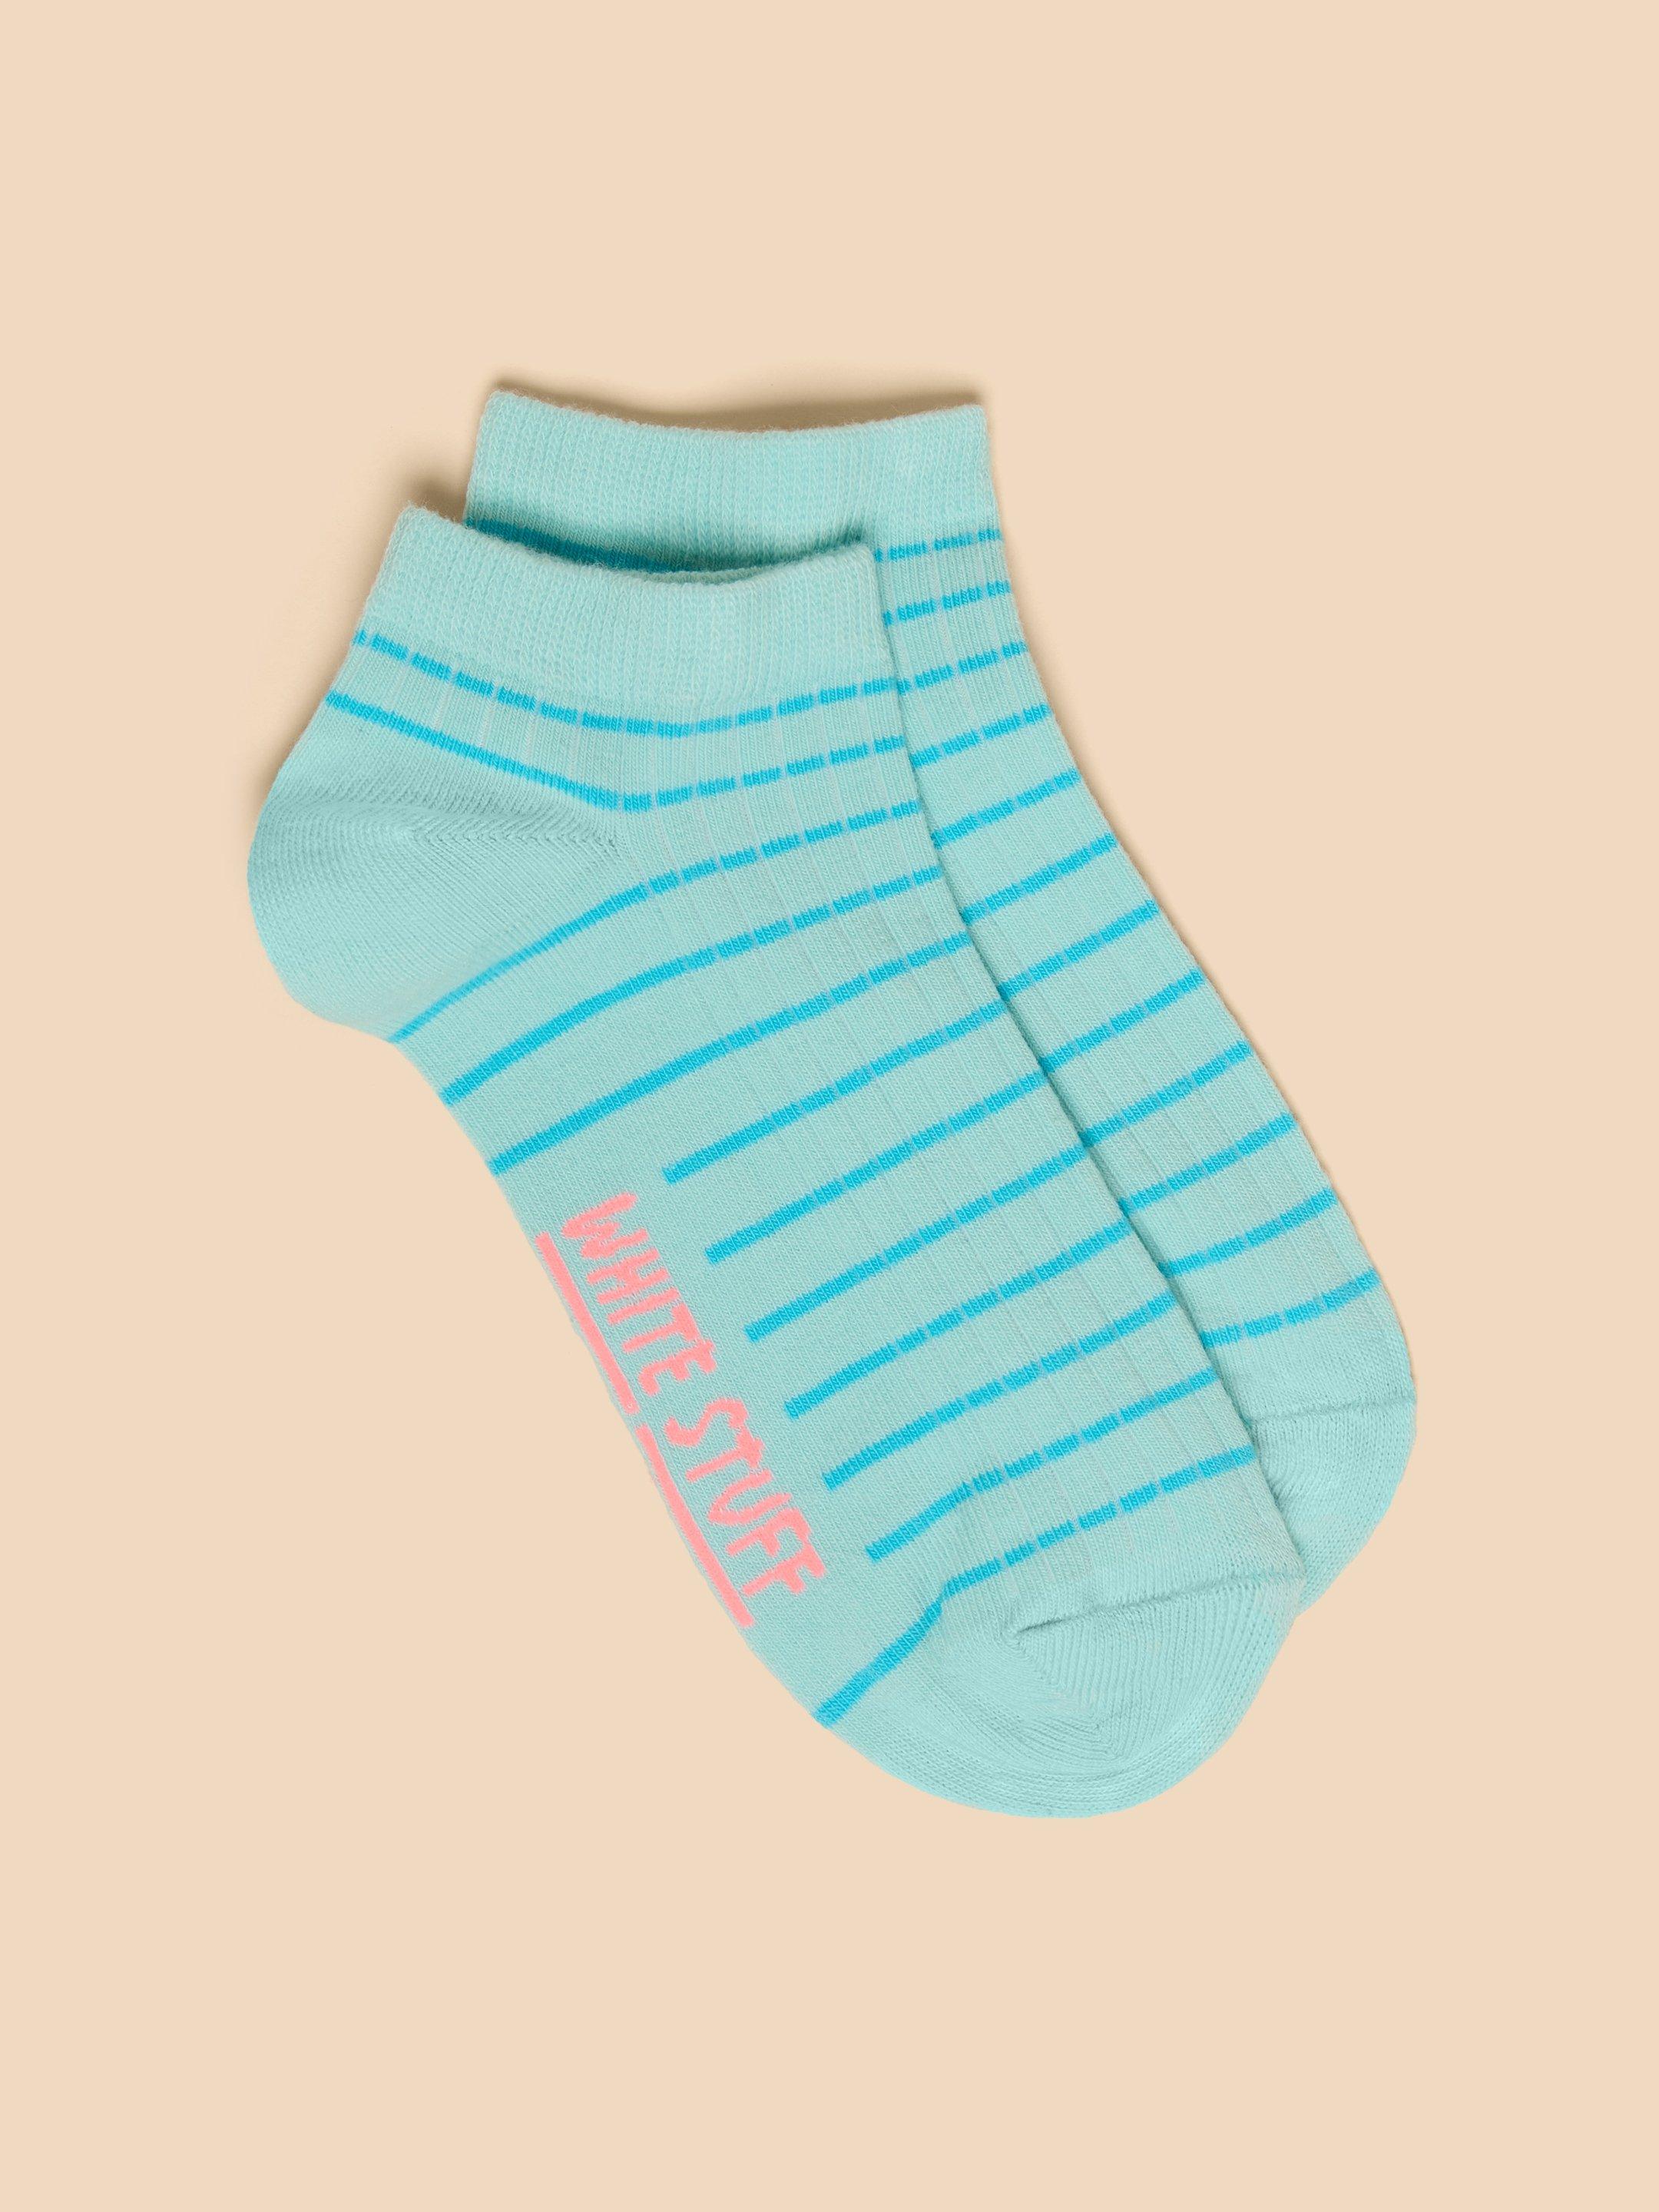 Neon Ribbed Trainer Sock in LGT BLUE - LIFESTYLE